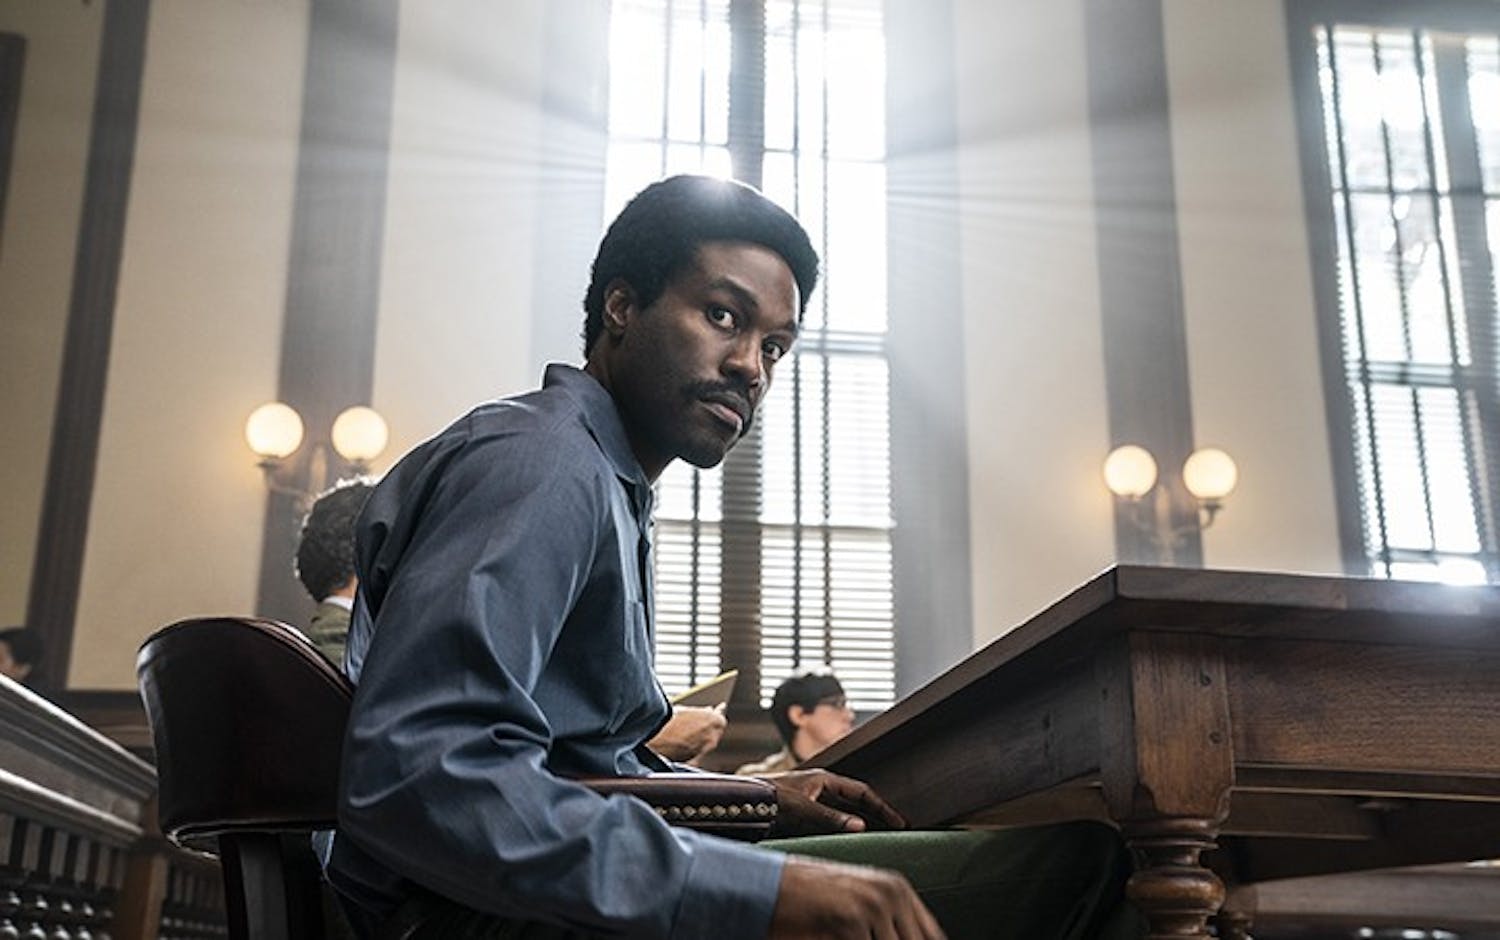 Yahya Abdul-Mateen II plays Bobby Seale in the new movie “The Trial of the Chicago 7,” which premiered on Netflix on Oct. 16, 2020.